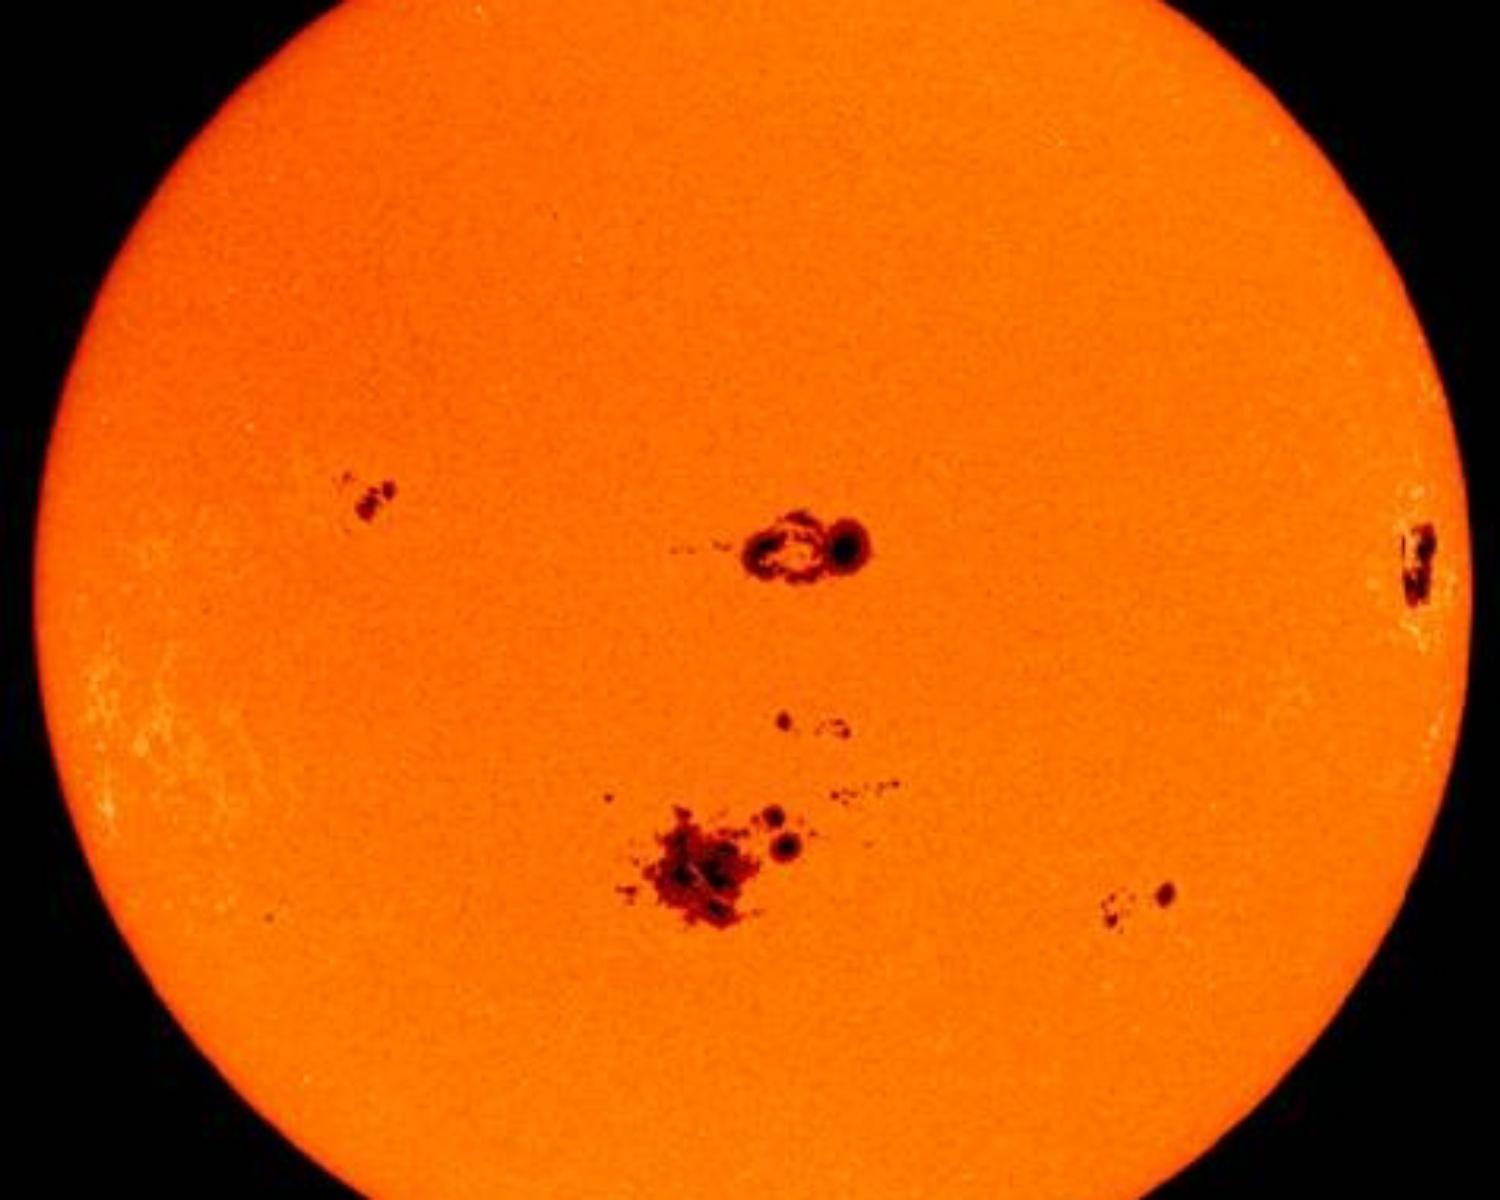 How do sunspots affect us on earth?